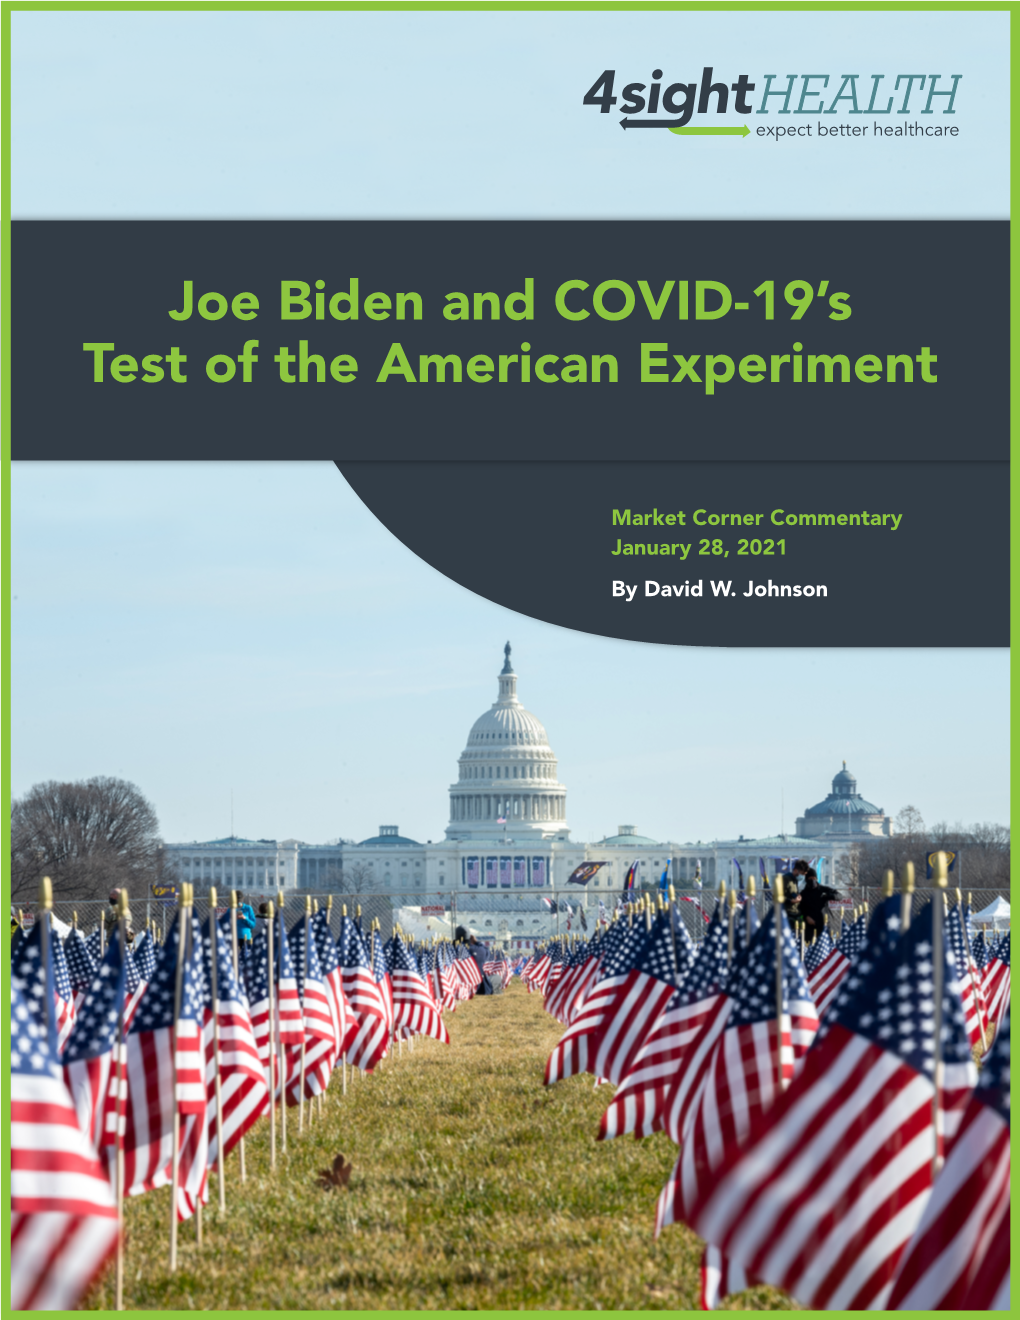 Joe Biden and COVID-19'S Test of the American Experiment